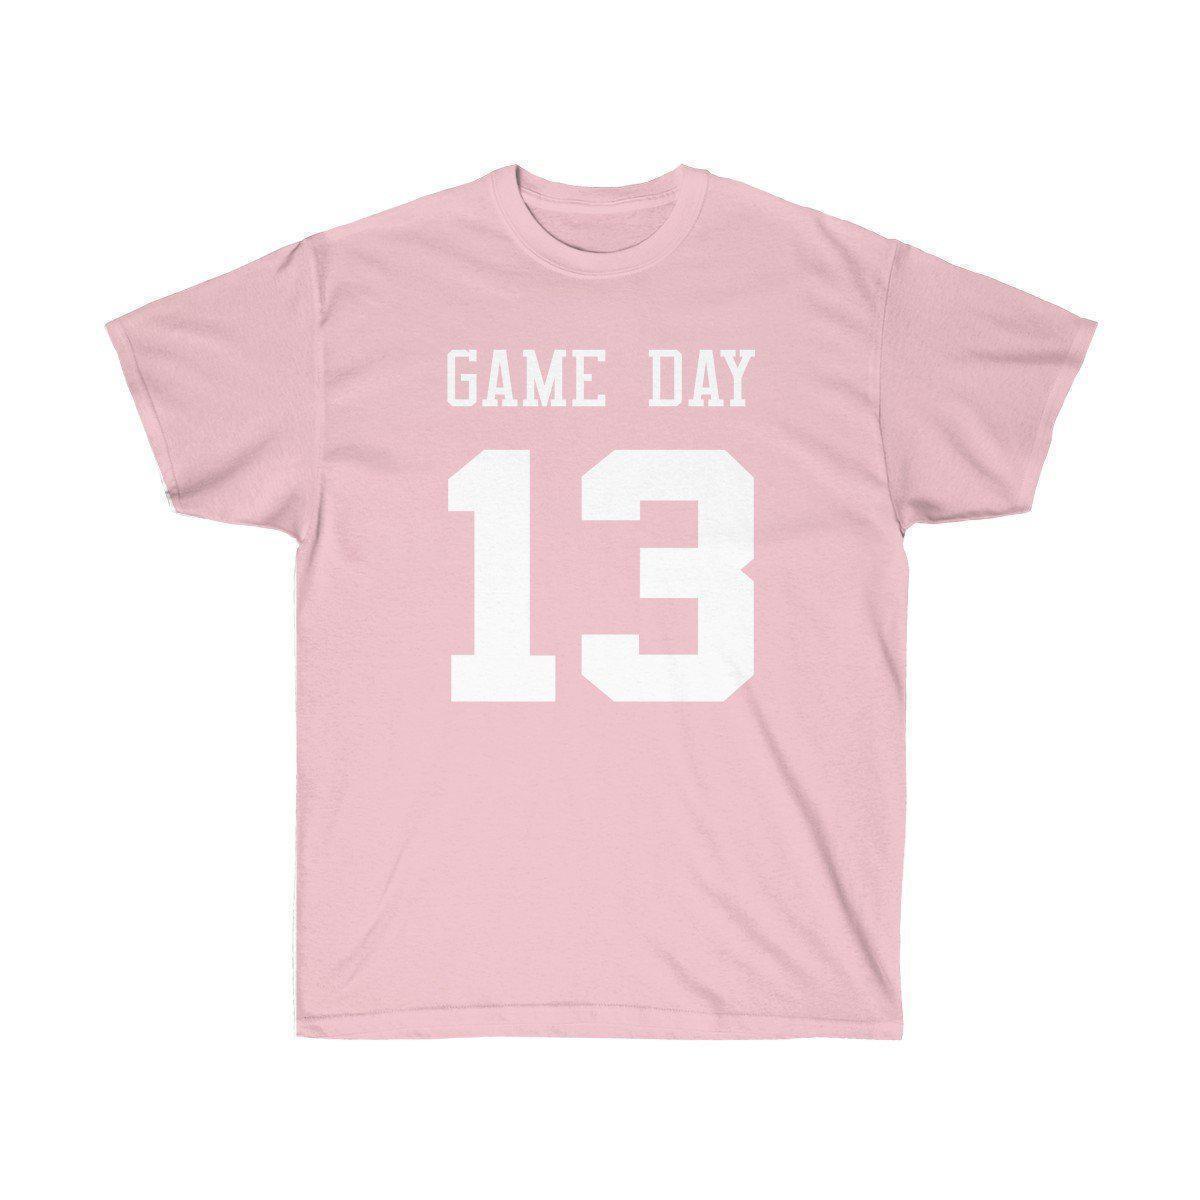 Game Day Tee - Sports T-shirt for Football, Basket, Soccer games-Light Pink-S-Archethype